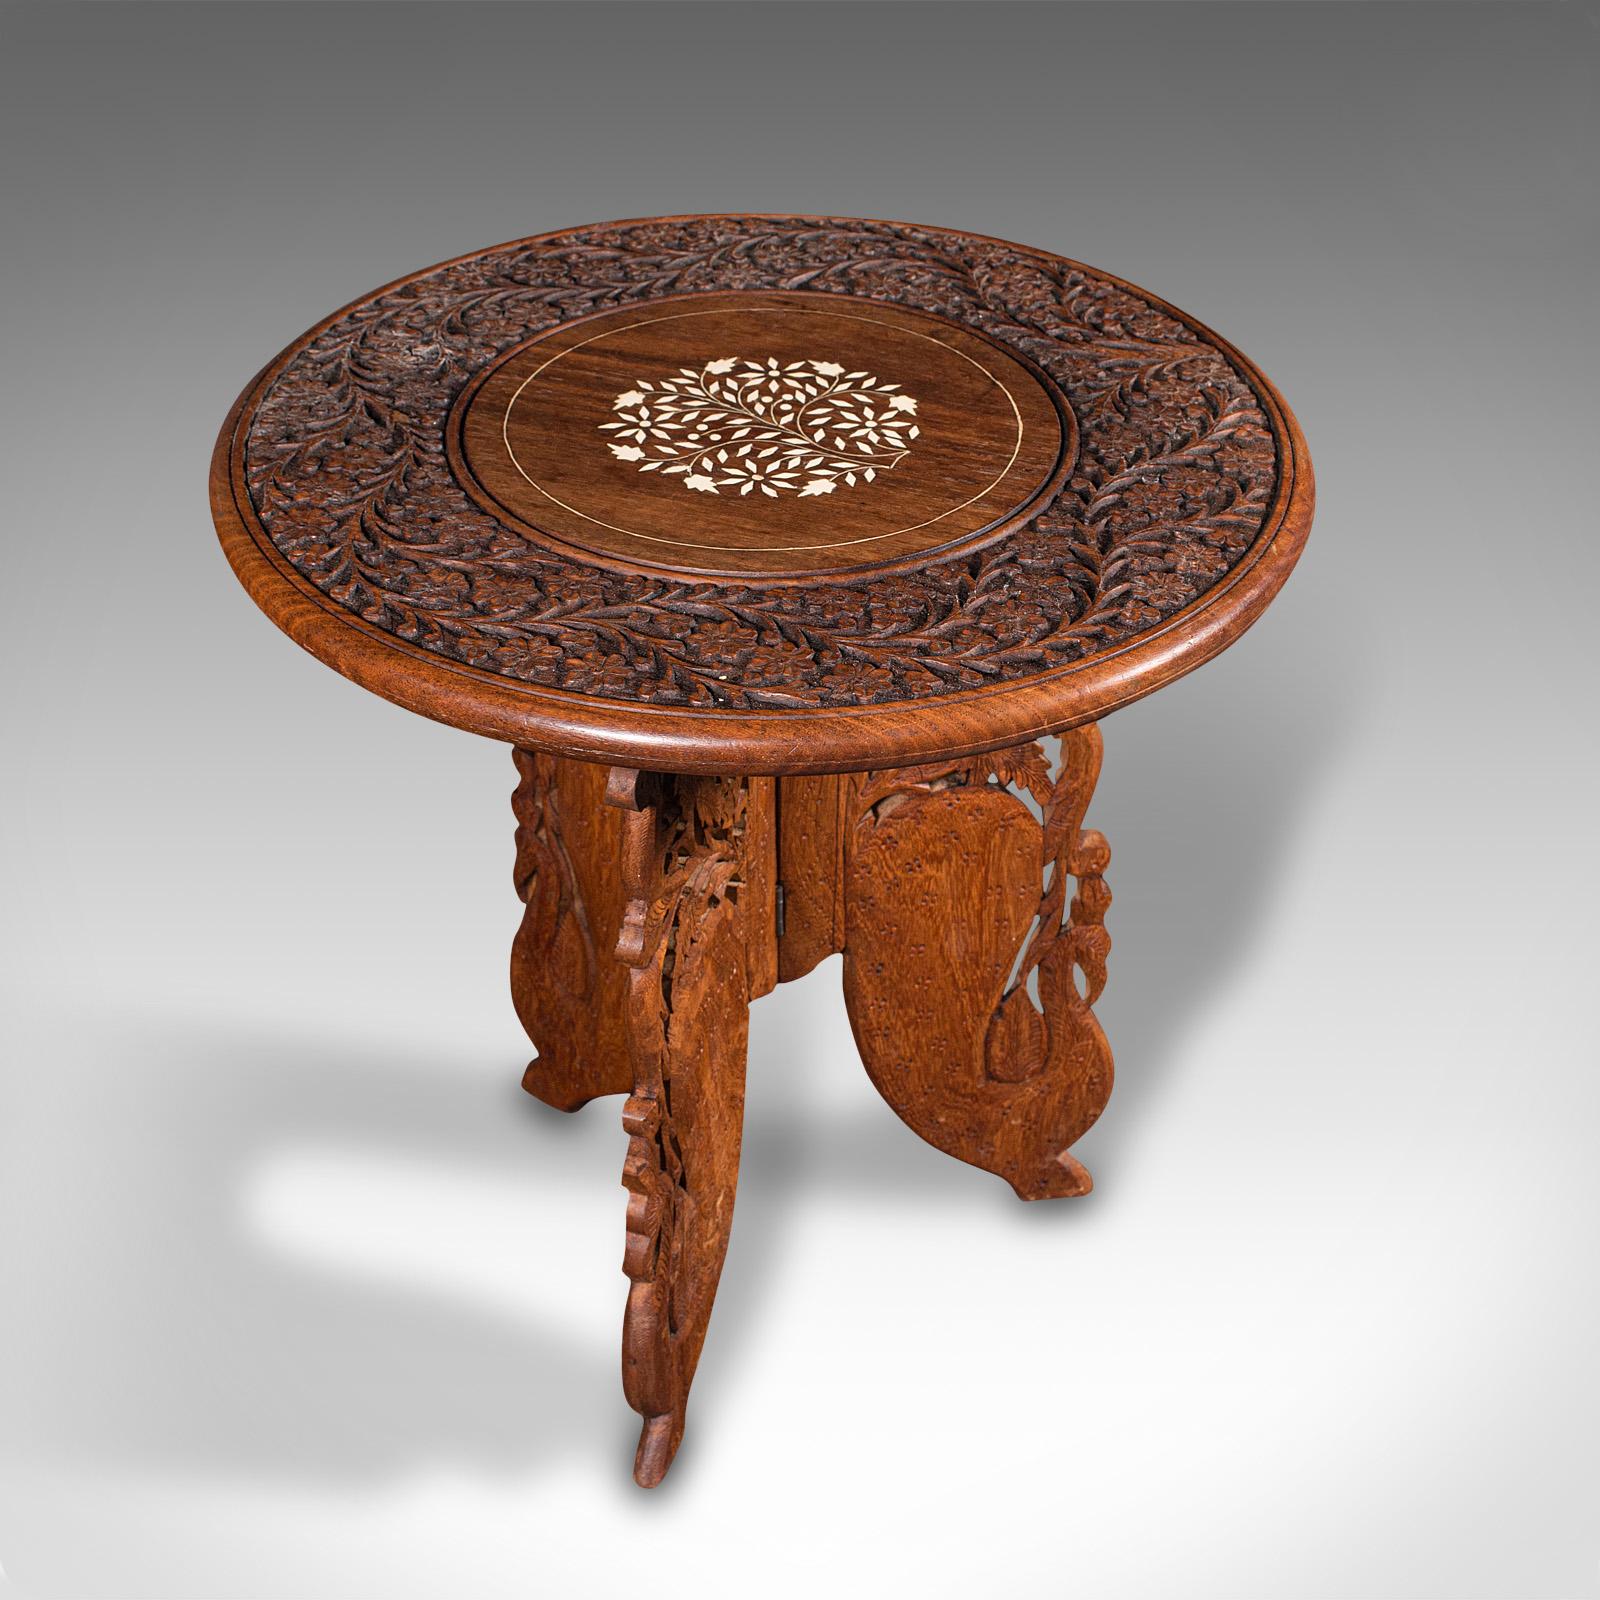 British Vintage Circular Side Table, Anglo-Indian, Teak, Lamp, Wine, Colonial, Art Deco For Sale